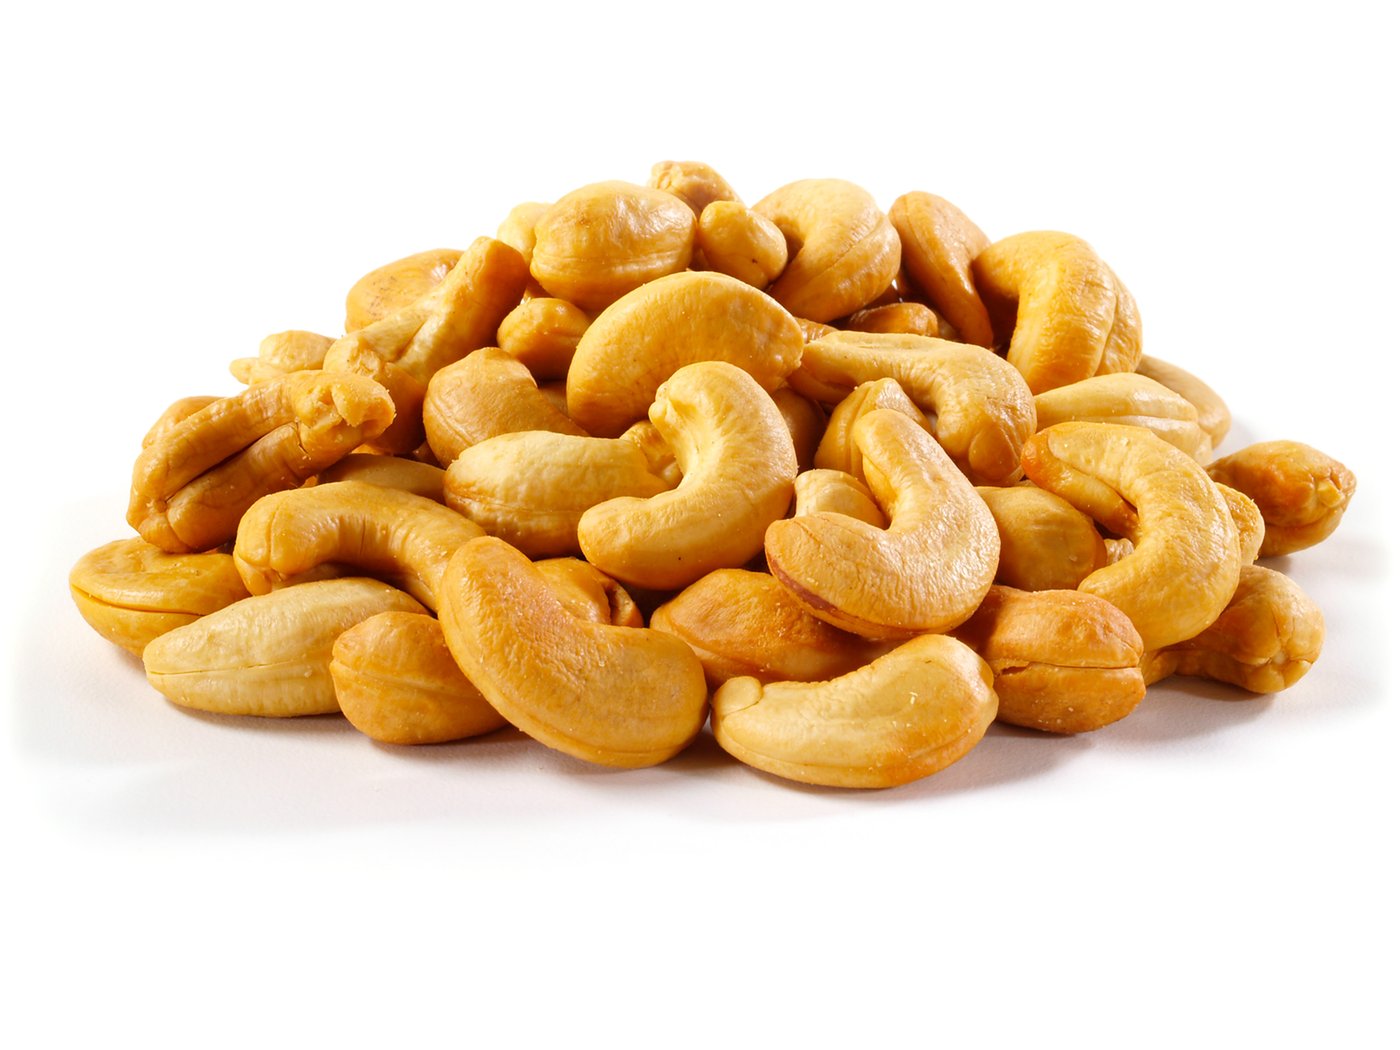 Dry Roasted Cashews (Unsalted) photo